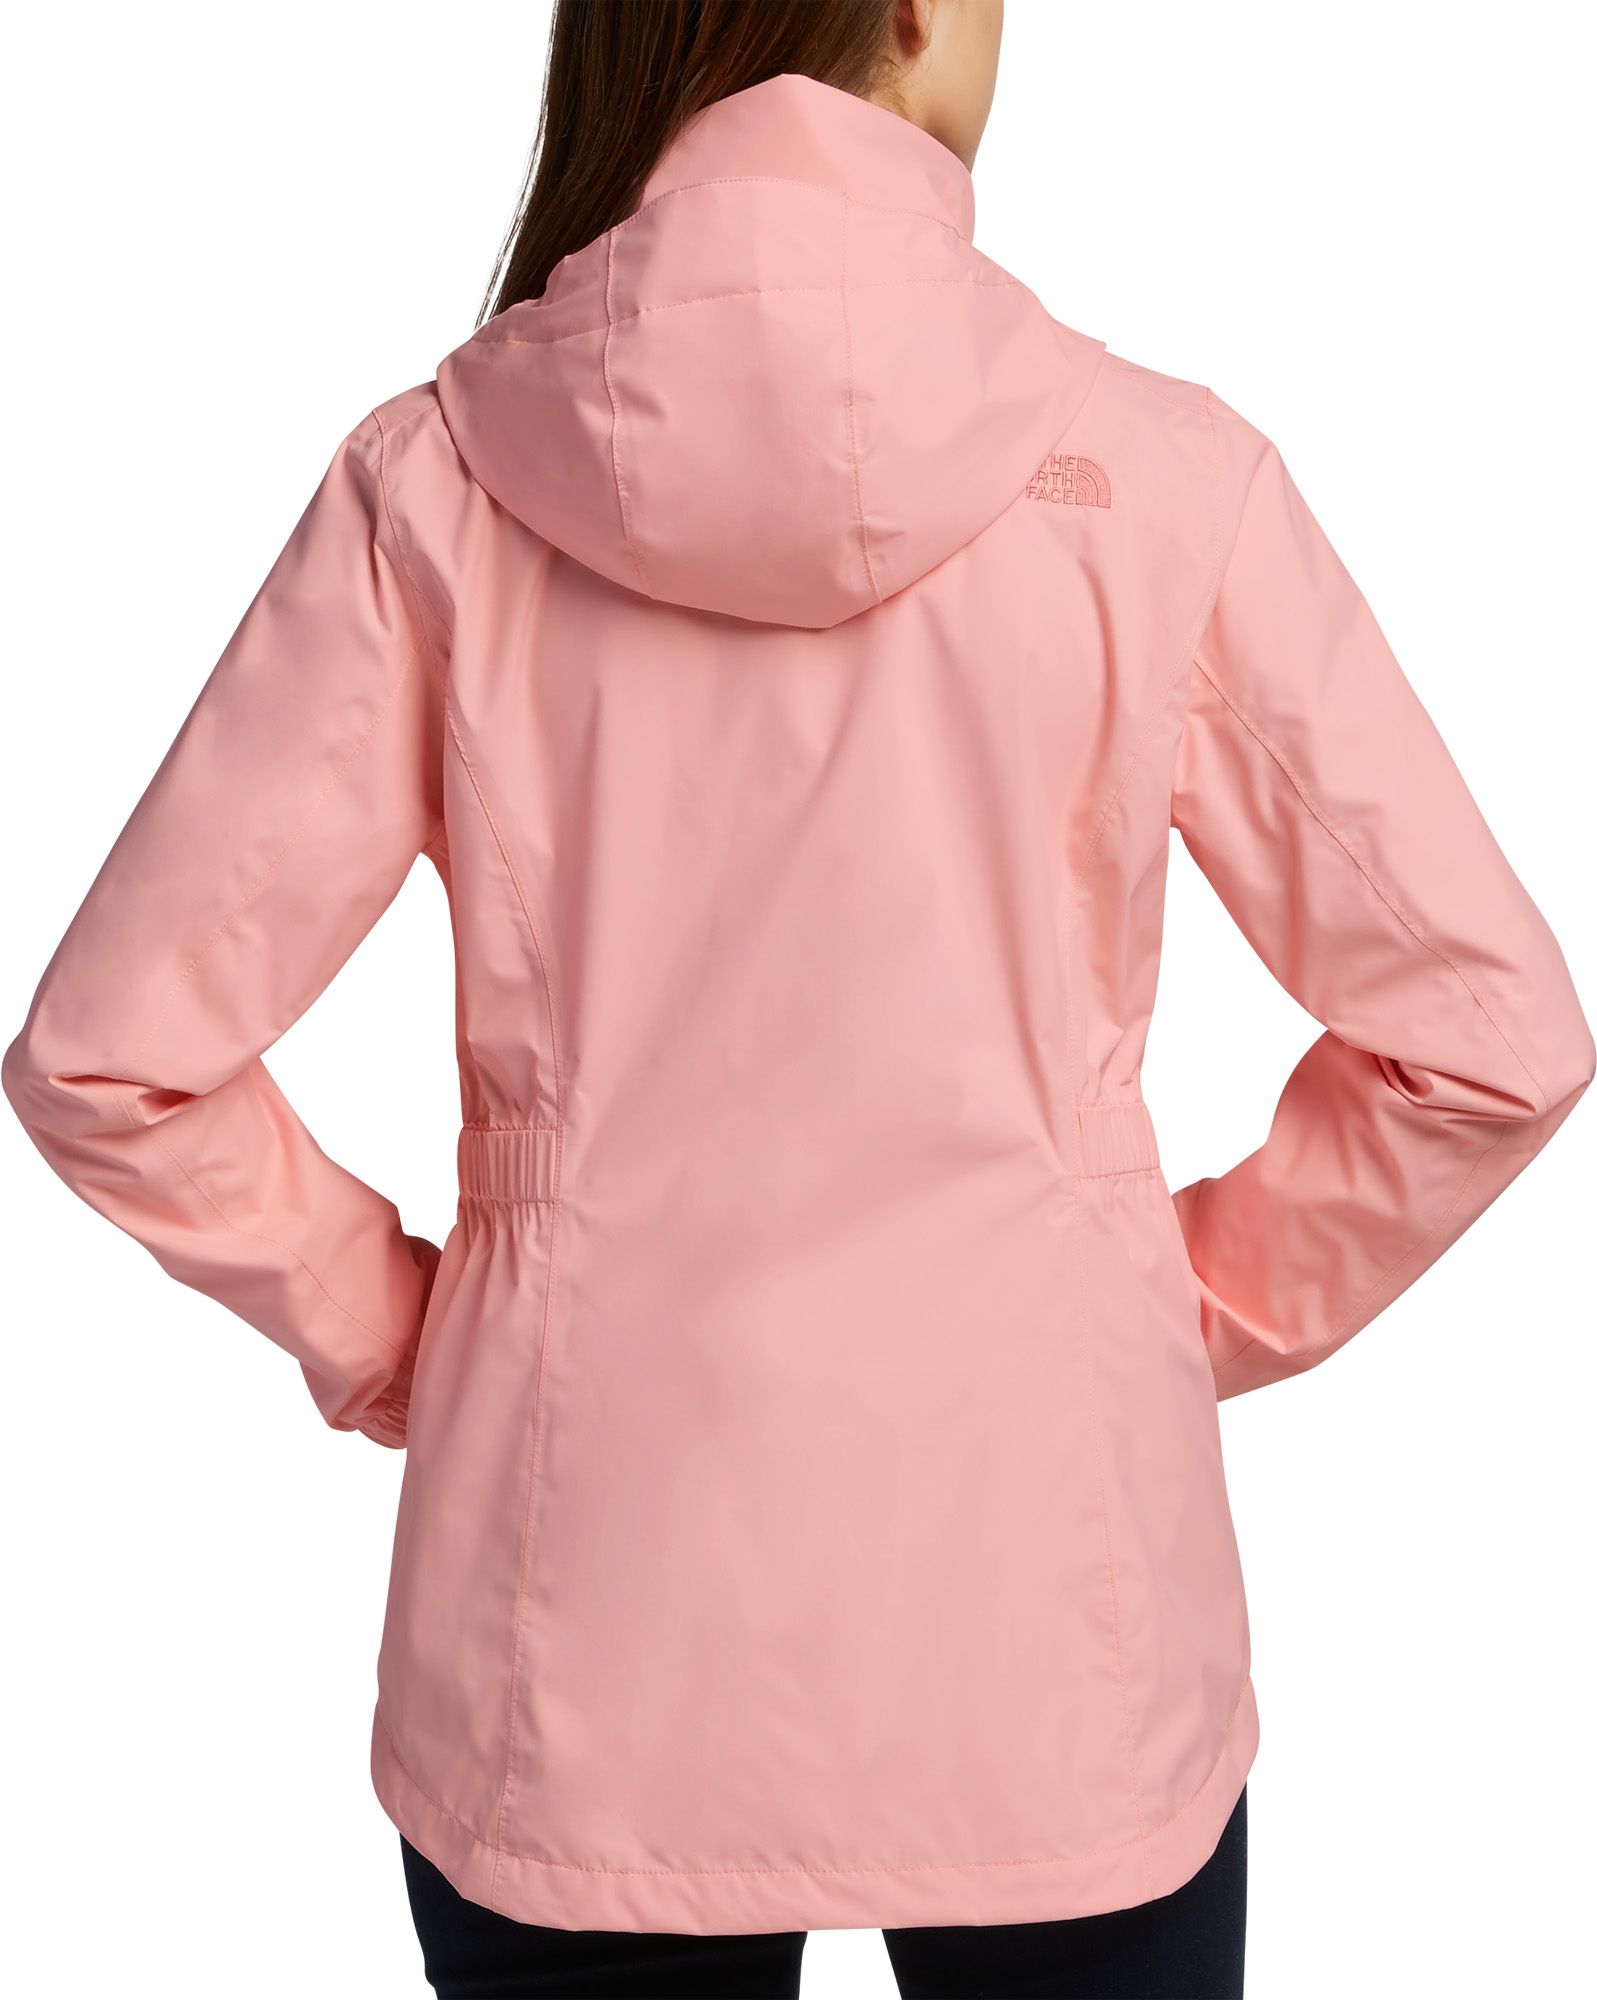 the north face women's resolve parka ii